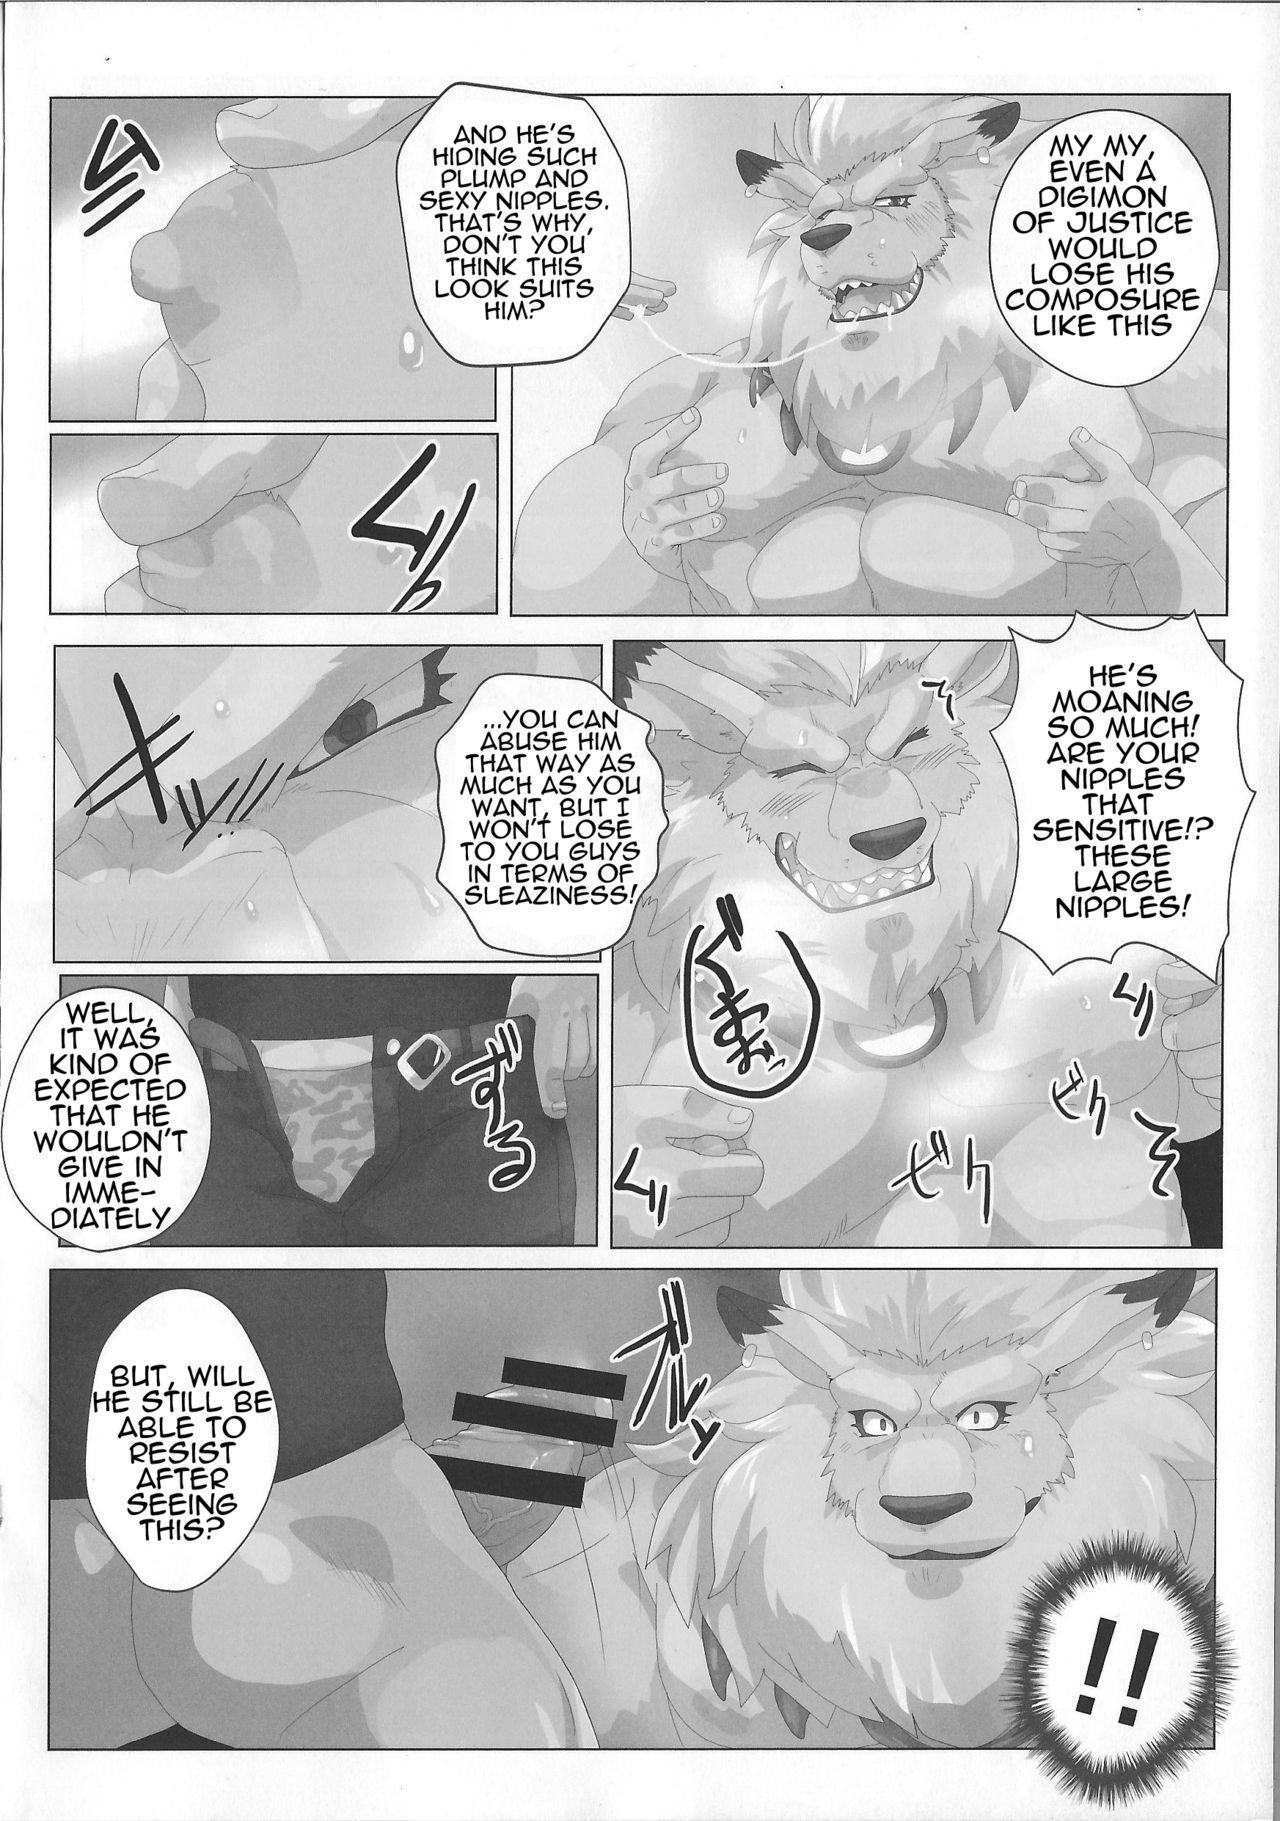 [Debirobu] For the Lion-Man Type Electric Life Form to Overturn Fate - Leomon Doujin [ENG] 10